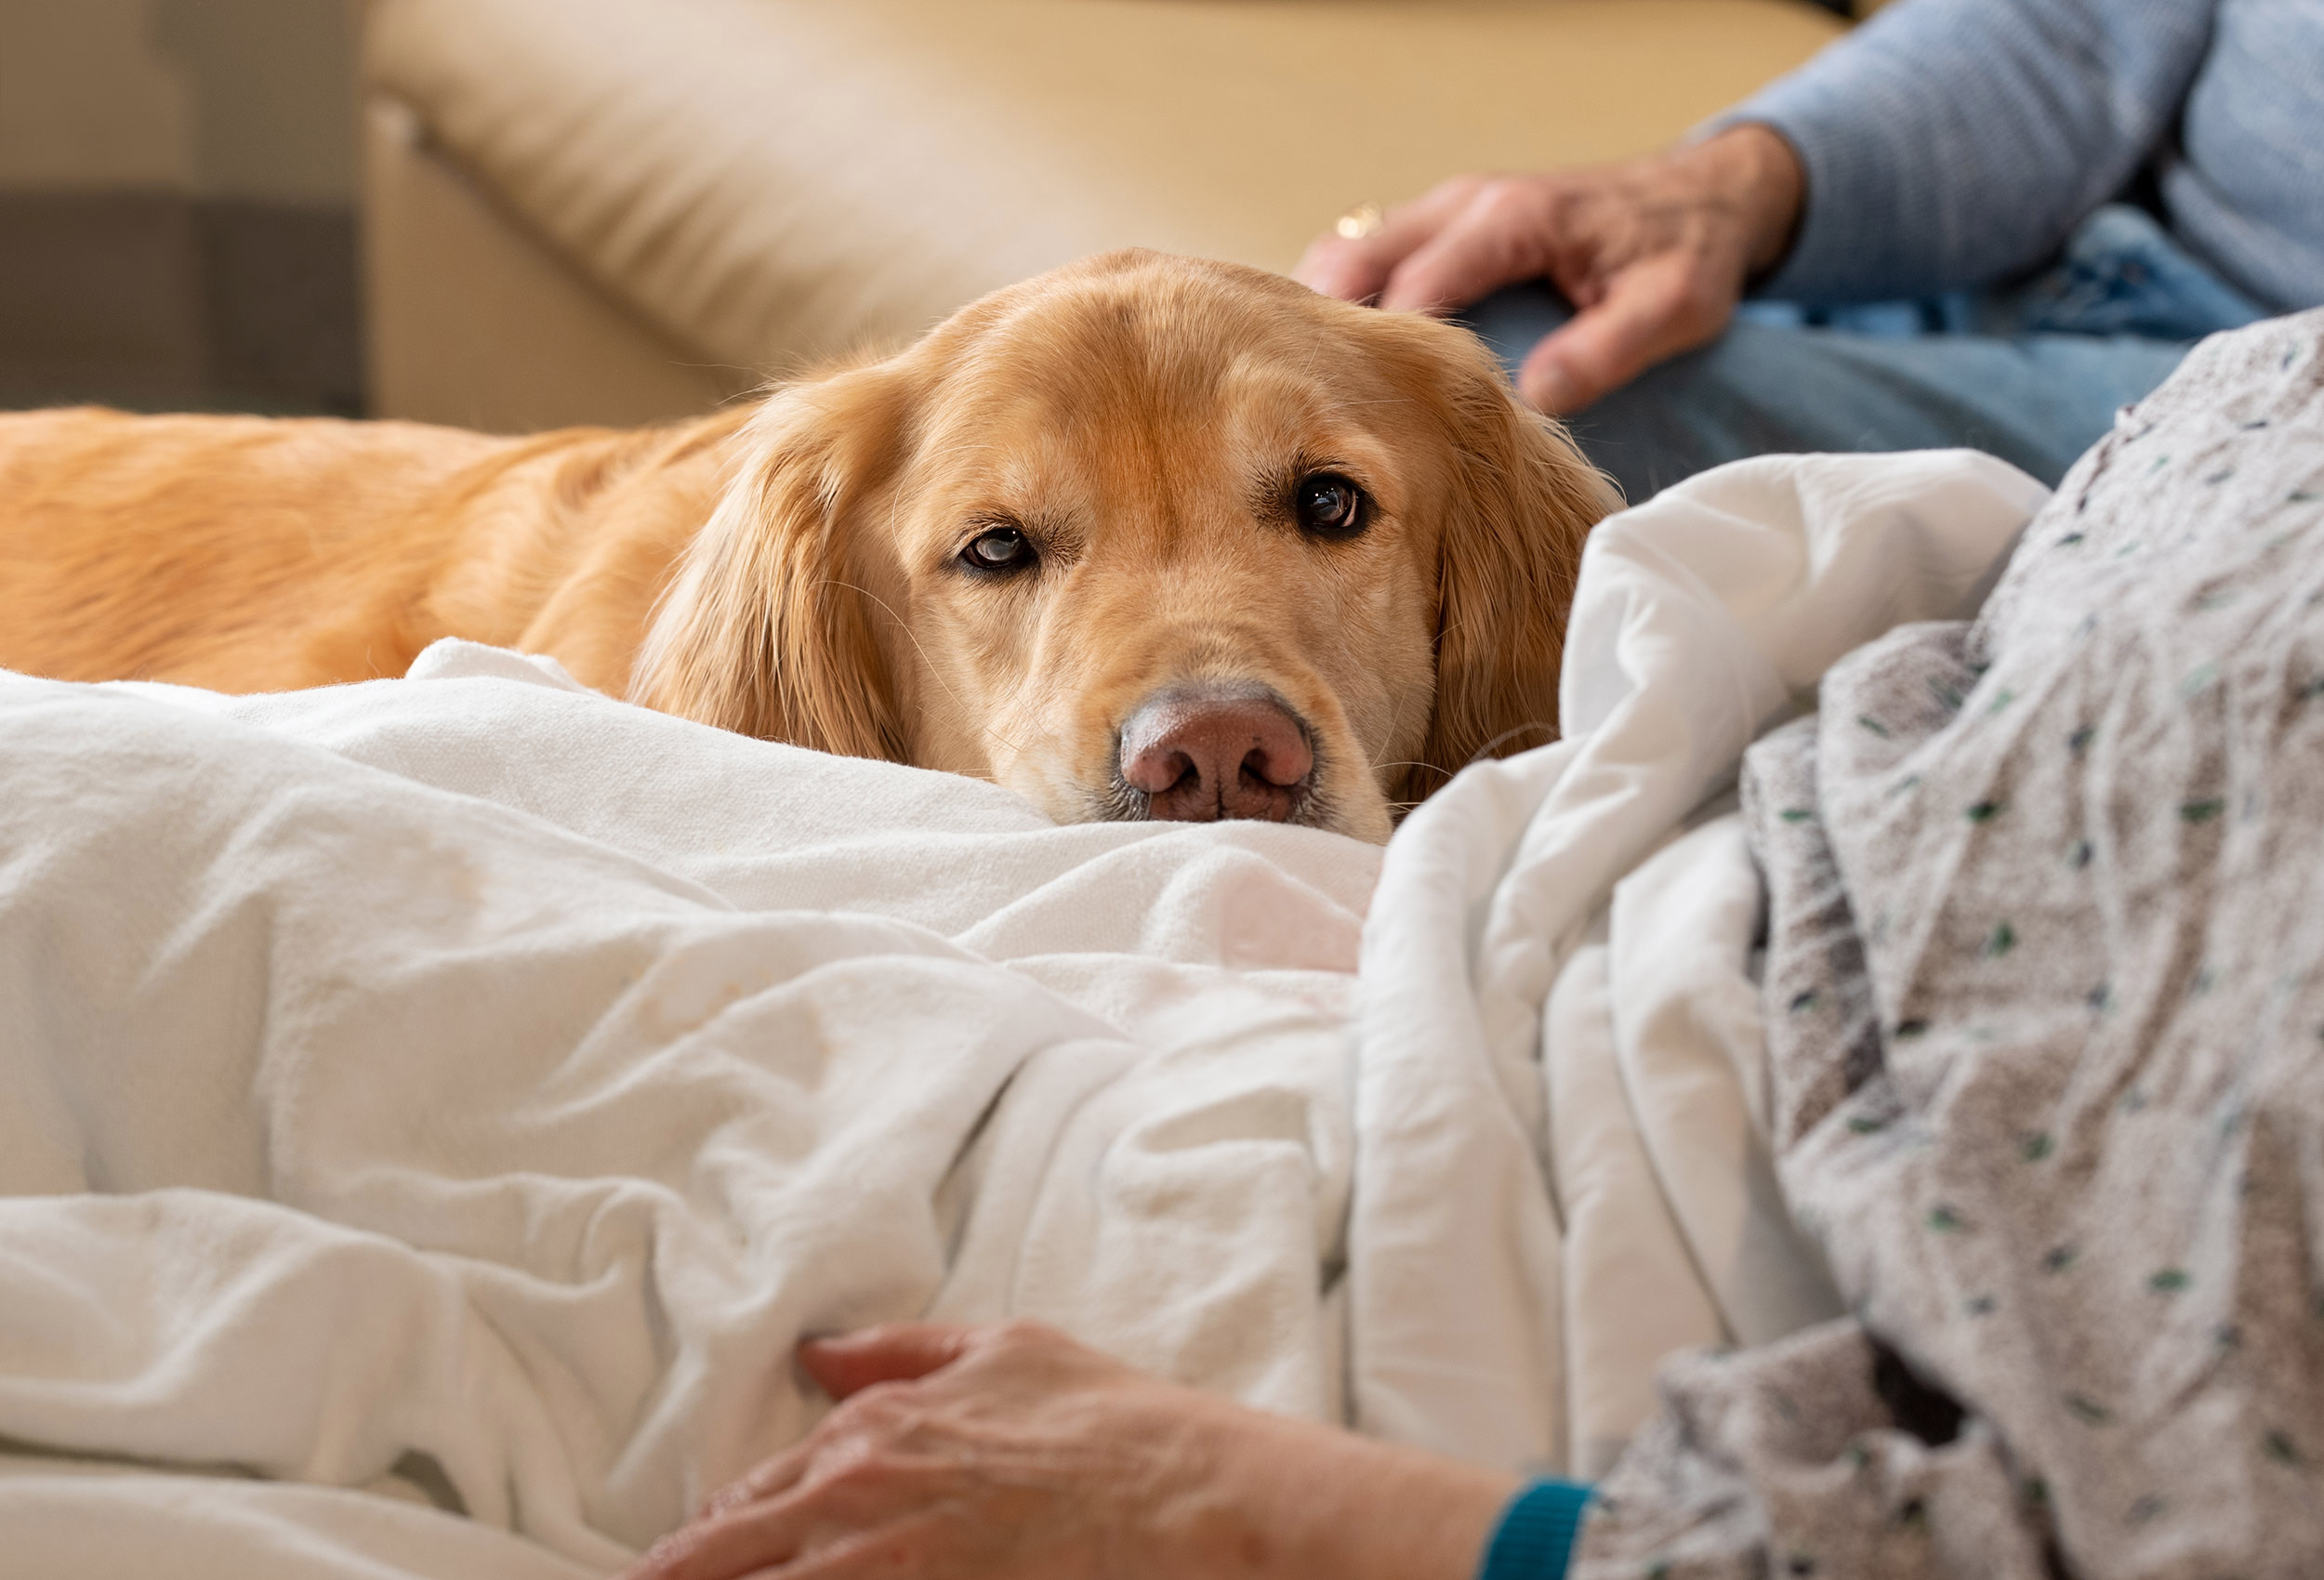 Goden Retriever Therapy Dog at hospital bedside